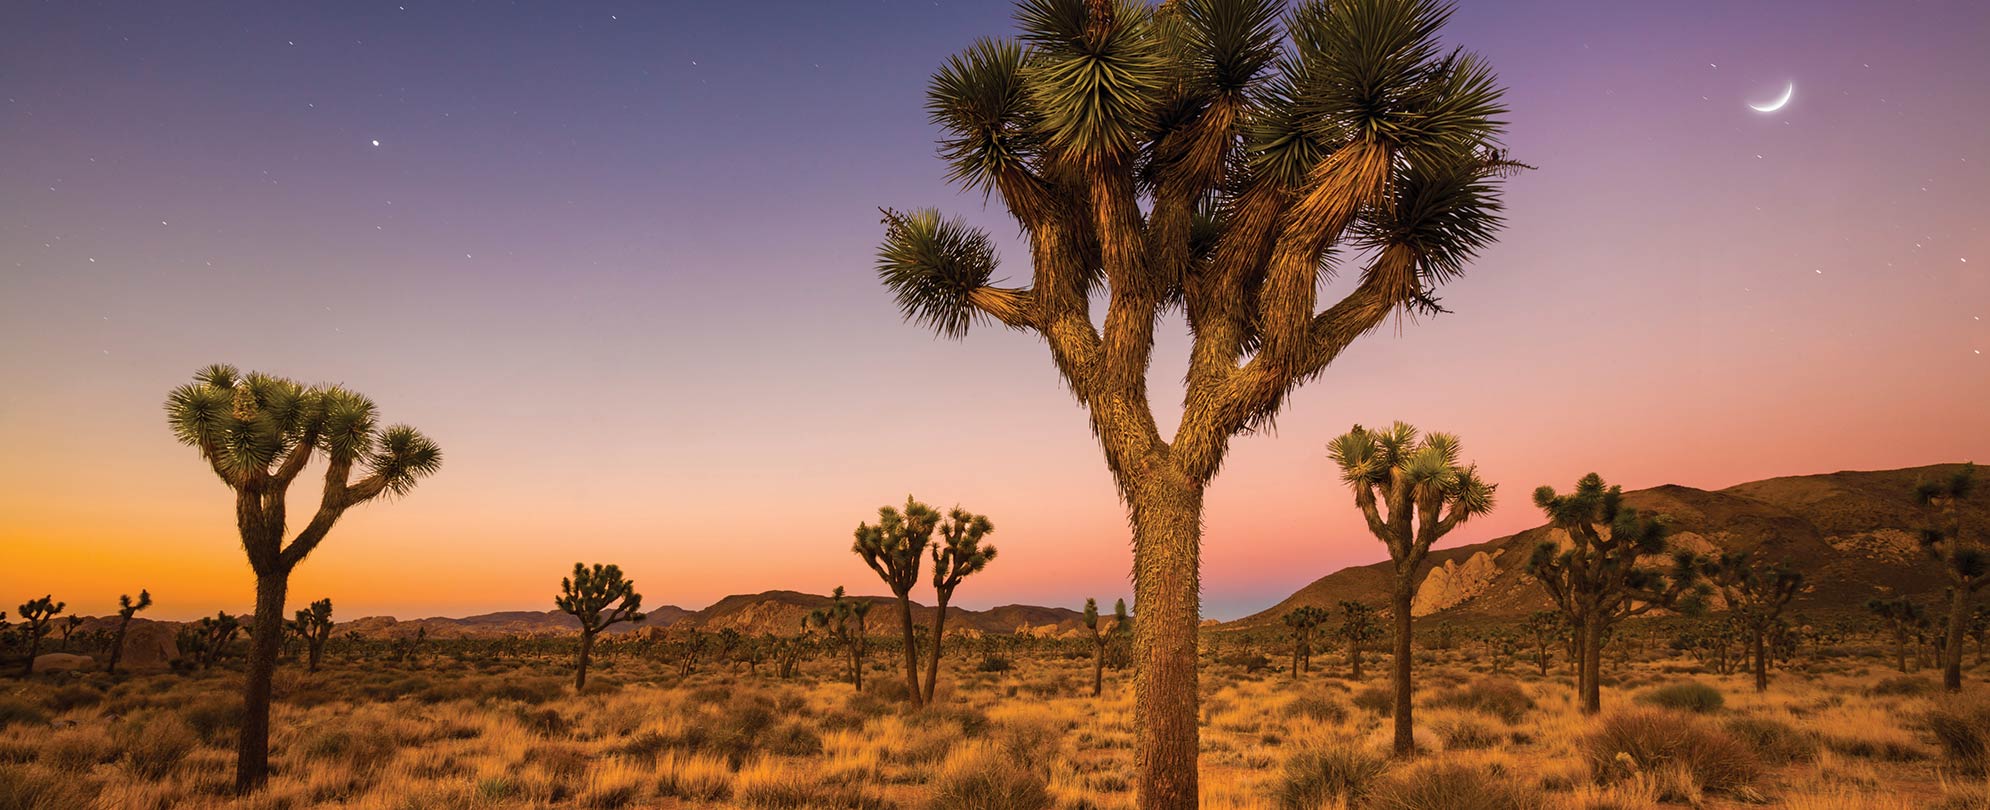 Several Joshua trees dot the desert landscape at night during a vacation to Joshua Tree National Park in California